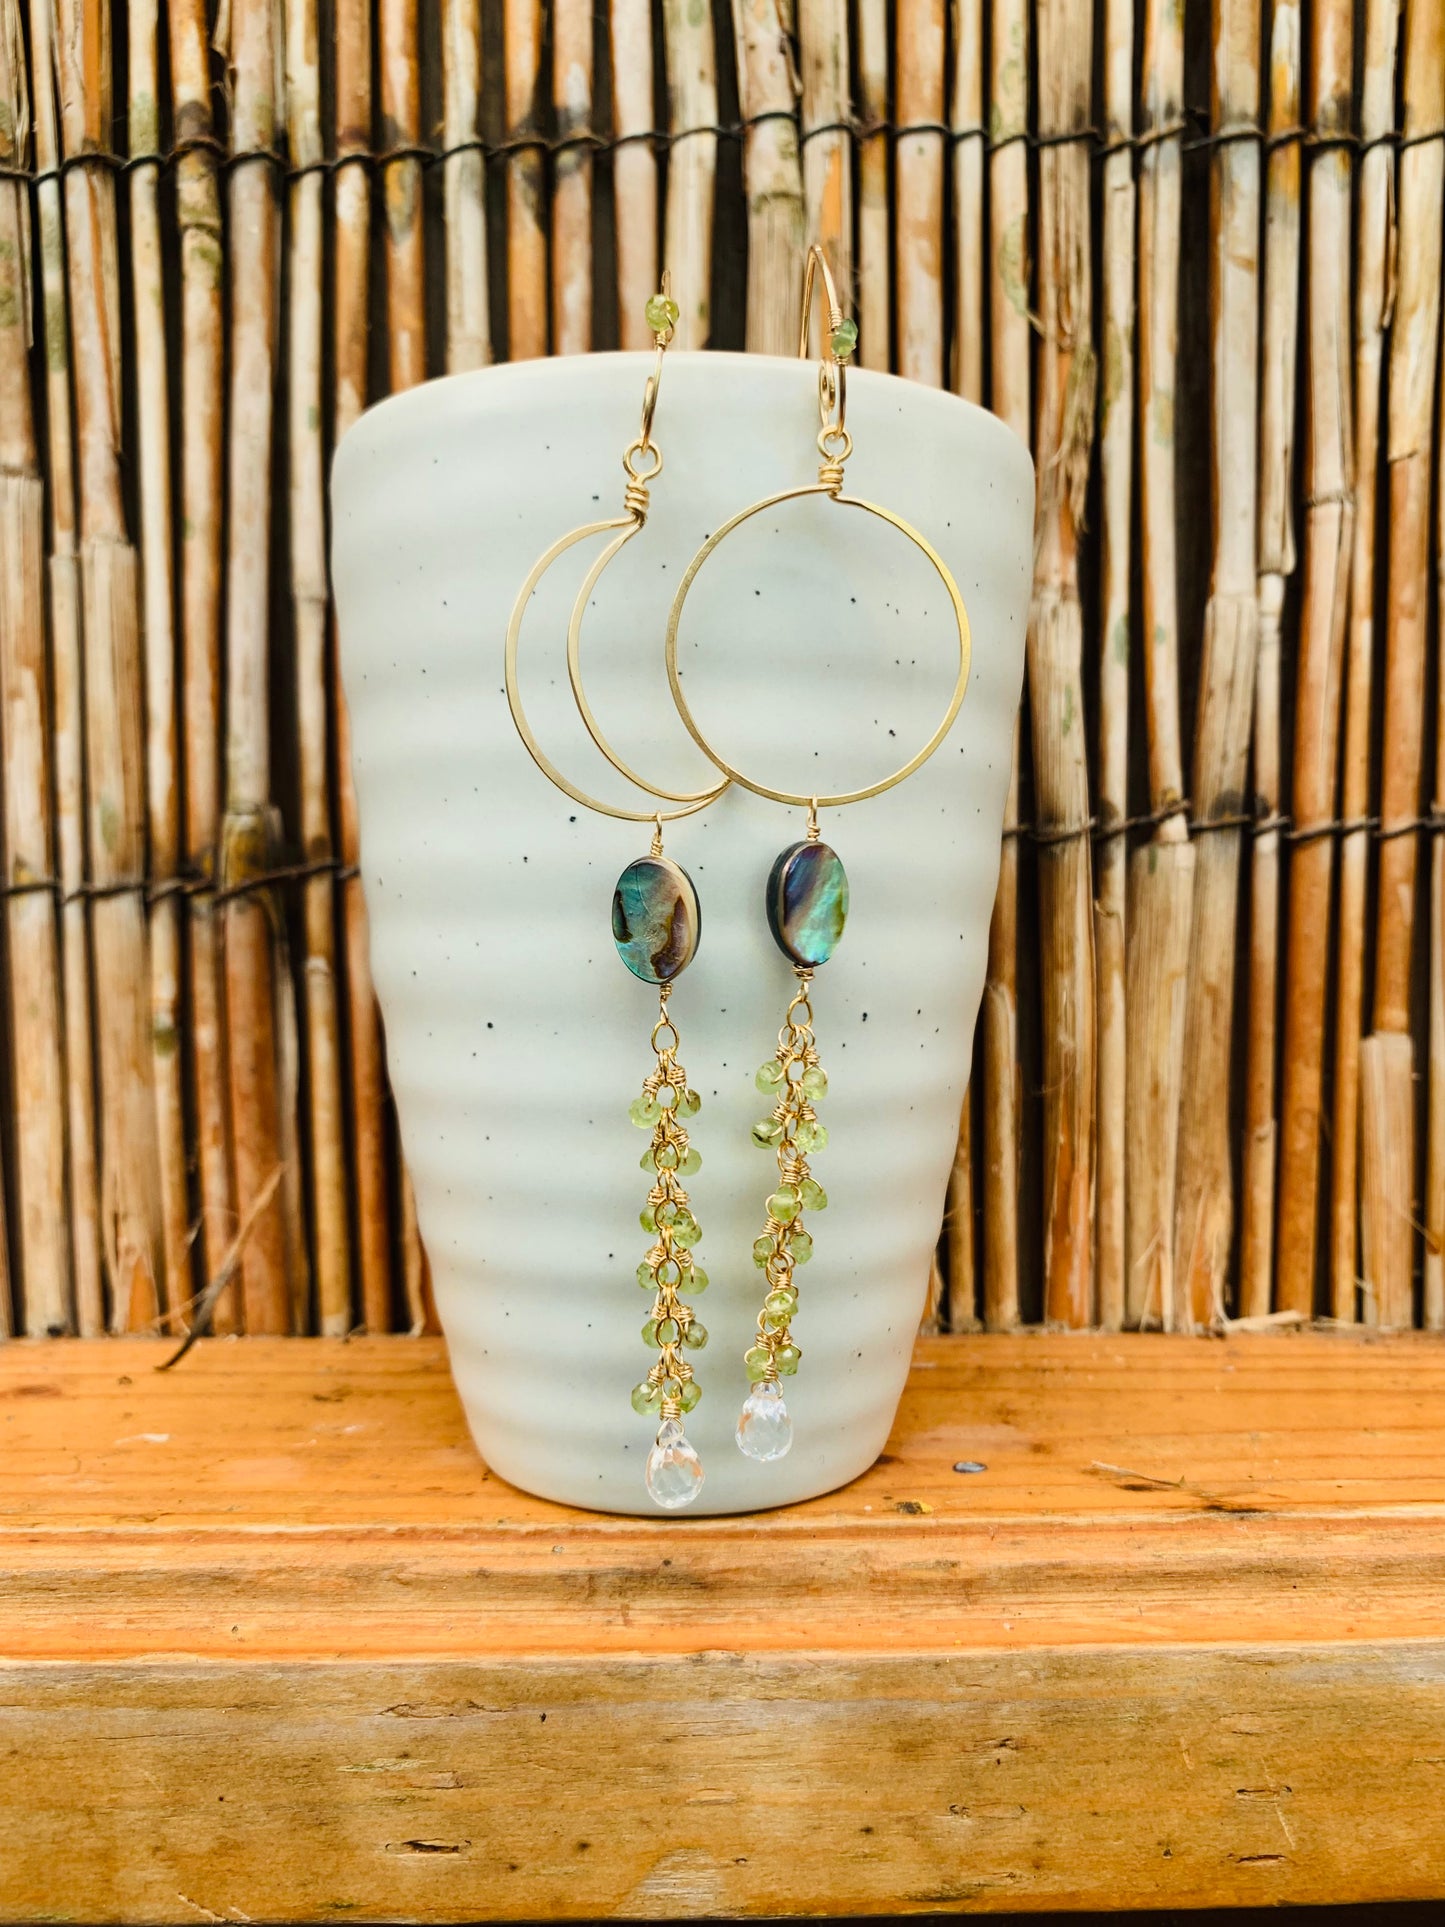 14kt Gold Filled Earrings, Abalone Shells, Clear Quartz Crystals